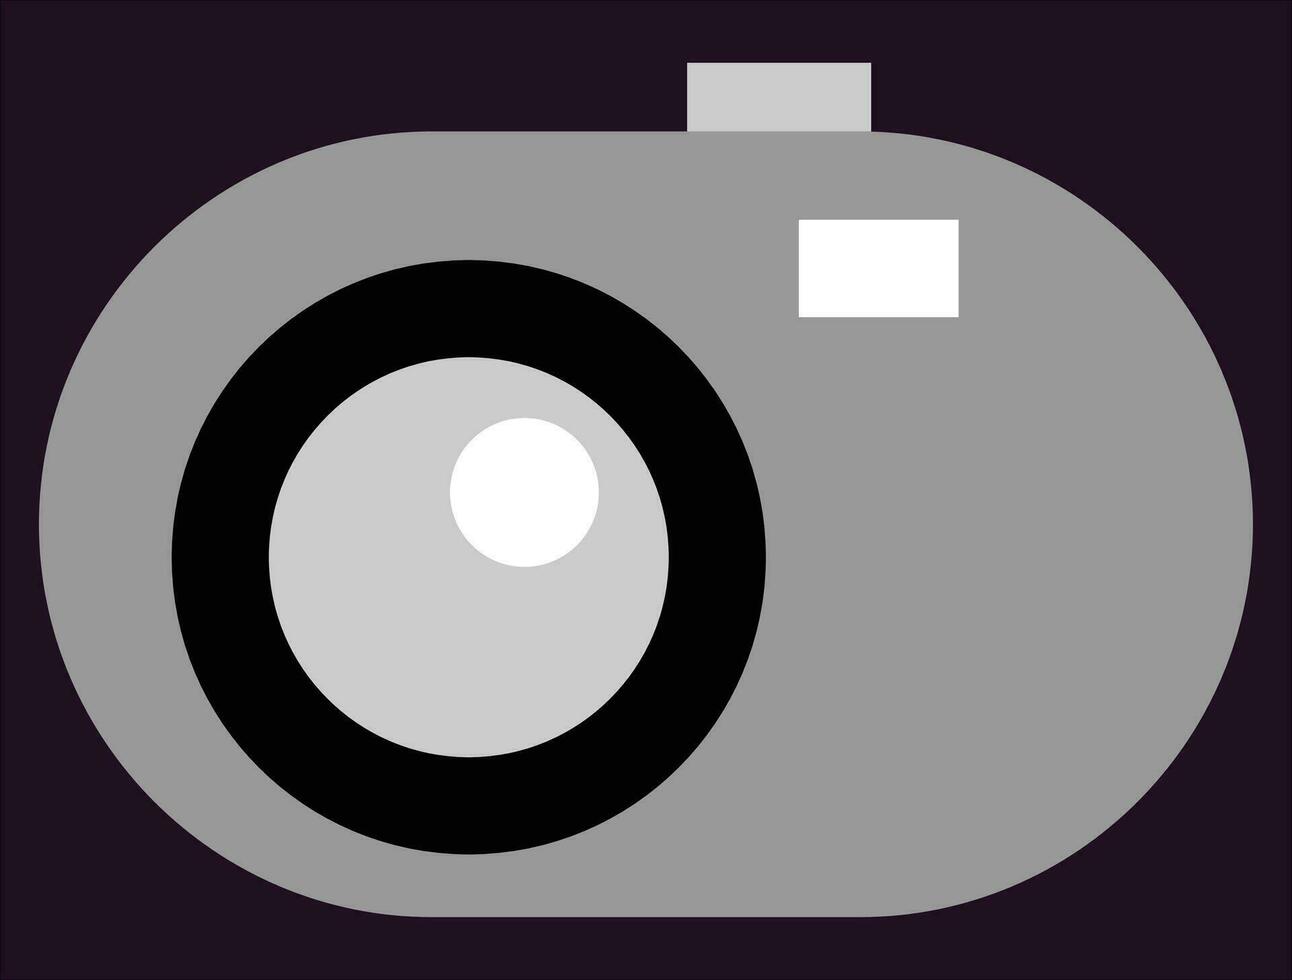 A camera, simple digital camera, camera icon, photography sign and sticker and label, camera illustration vector, minimal style illustration, grey and black and white and purple colors, good for apps vector